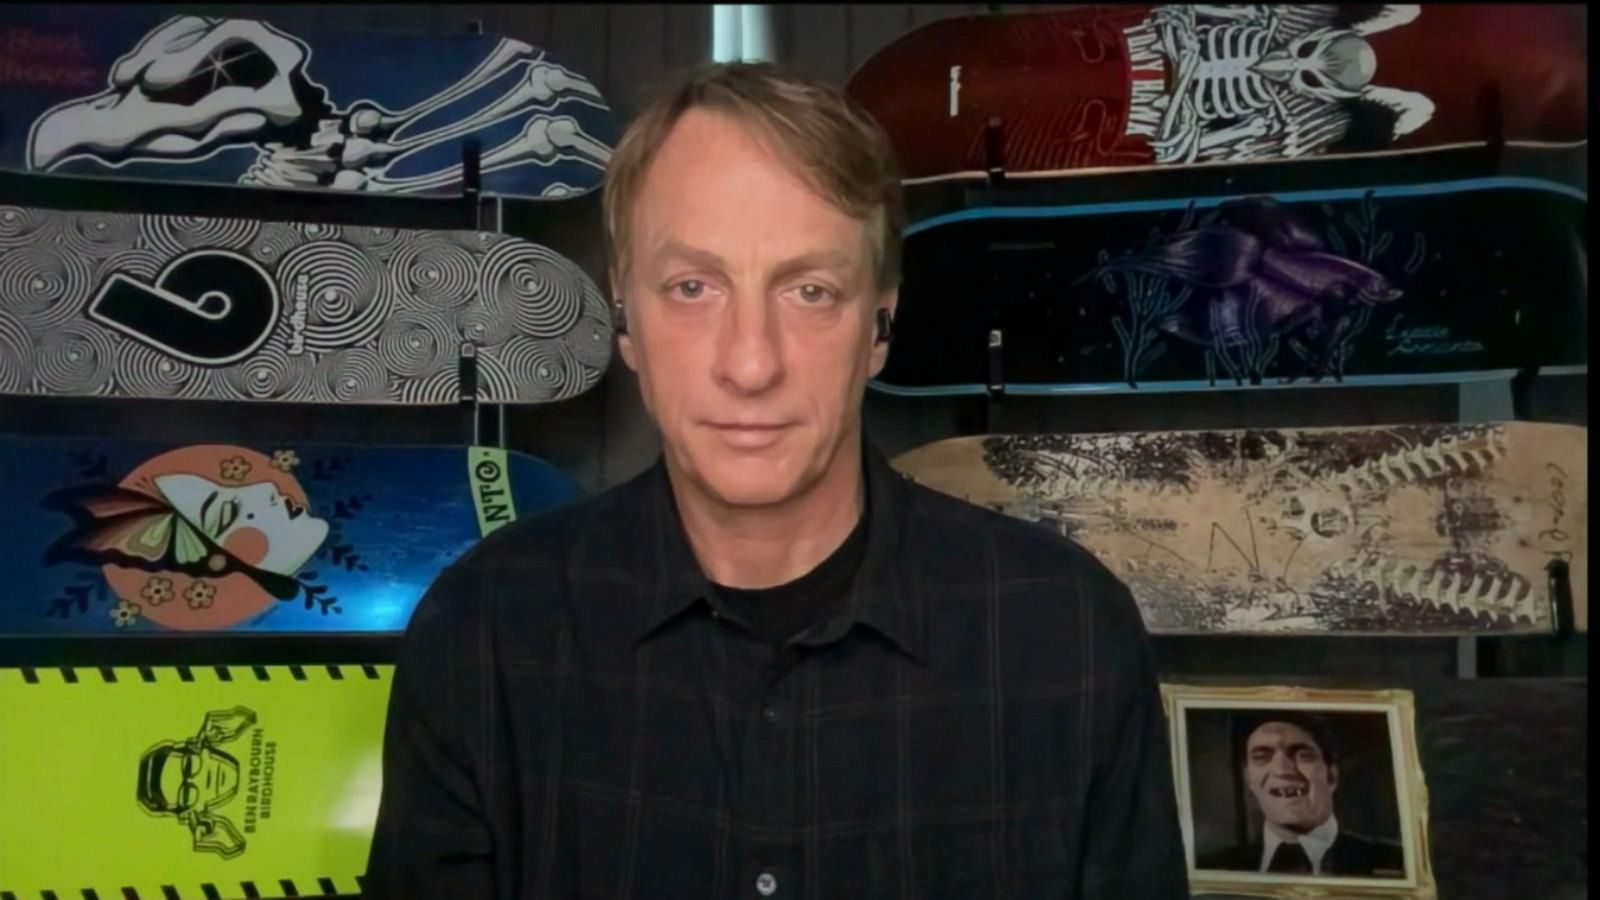 Here's what's inside Tony Hawk's wallet and his best financial advice